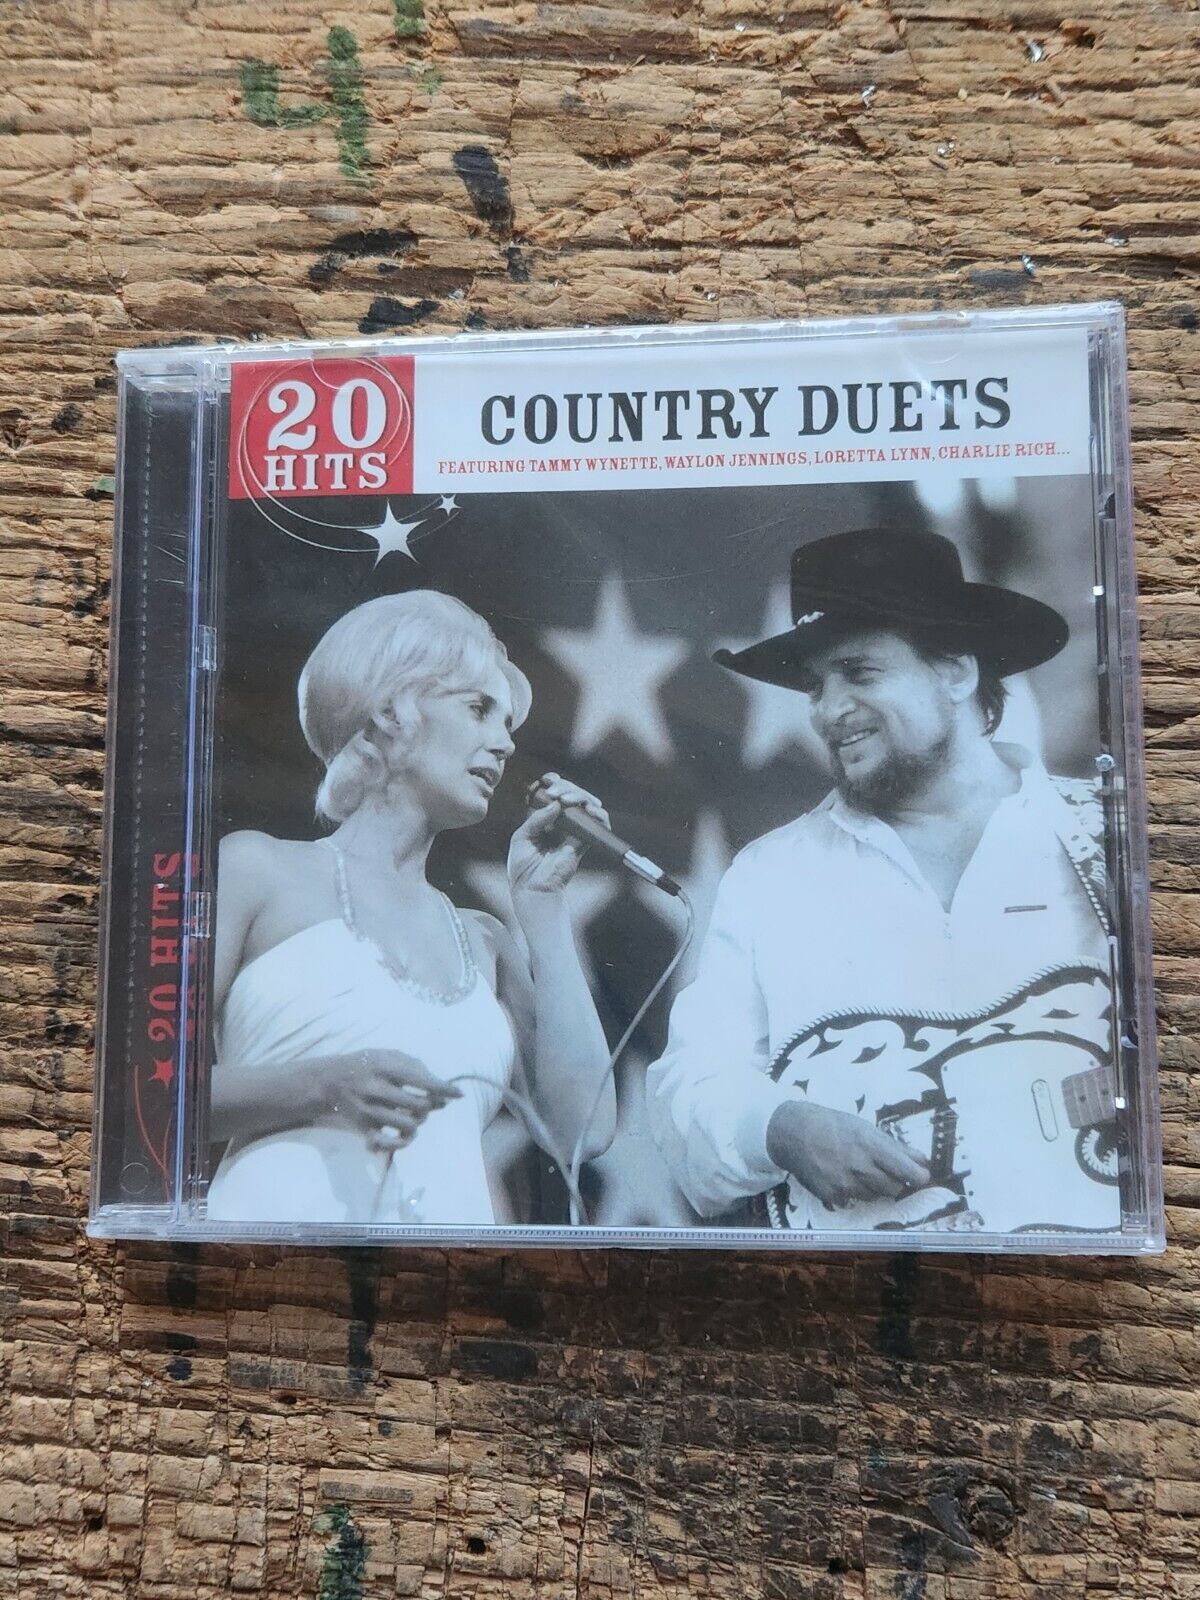  20 Hits Country Duets by Various Artists CD New Sealed 